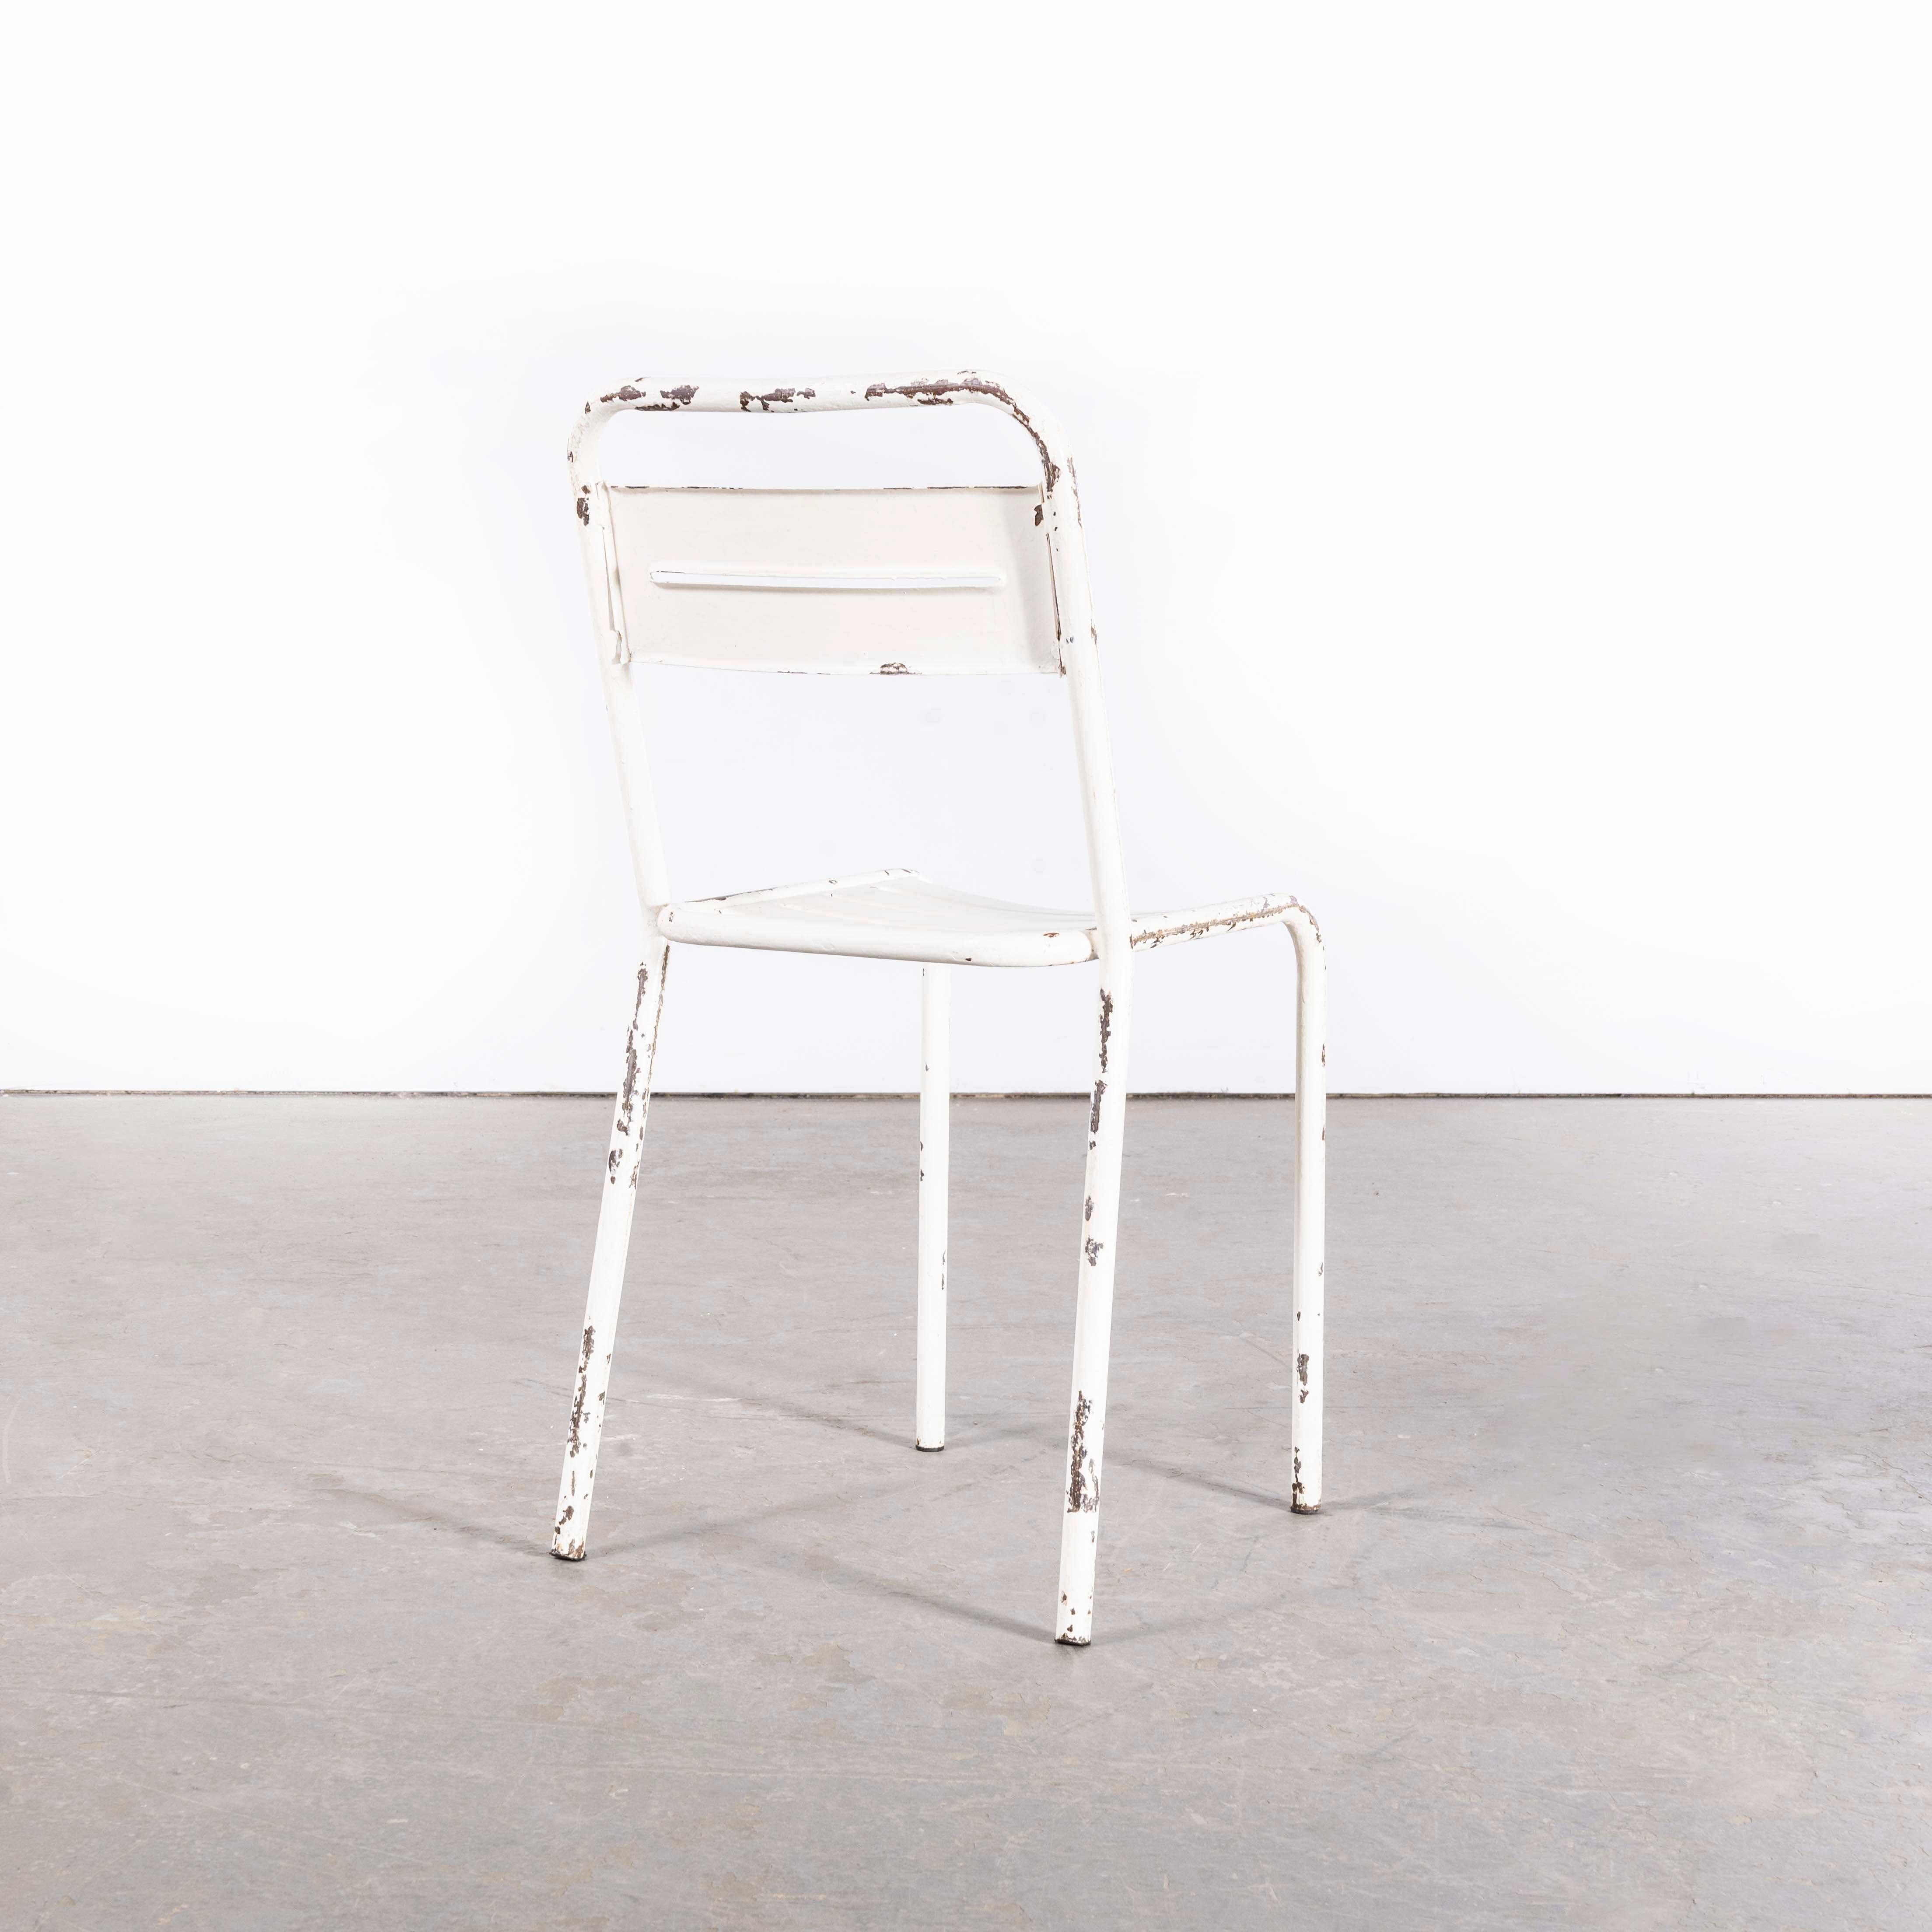 1950’s French White Metal Stacking Outdoor Chairs – Set Of Six

1950’s French White Metal Stacking Outdoor Chairs – Set Of Six. Reminiscent of Tolix but not made by Tolix, this style of chair was industrially produced in the 1950’s by various